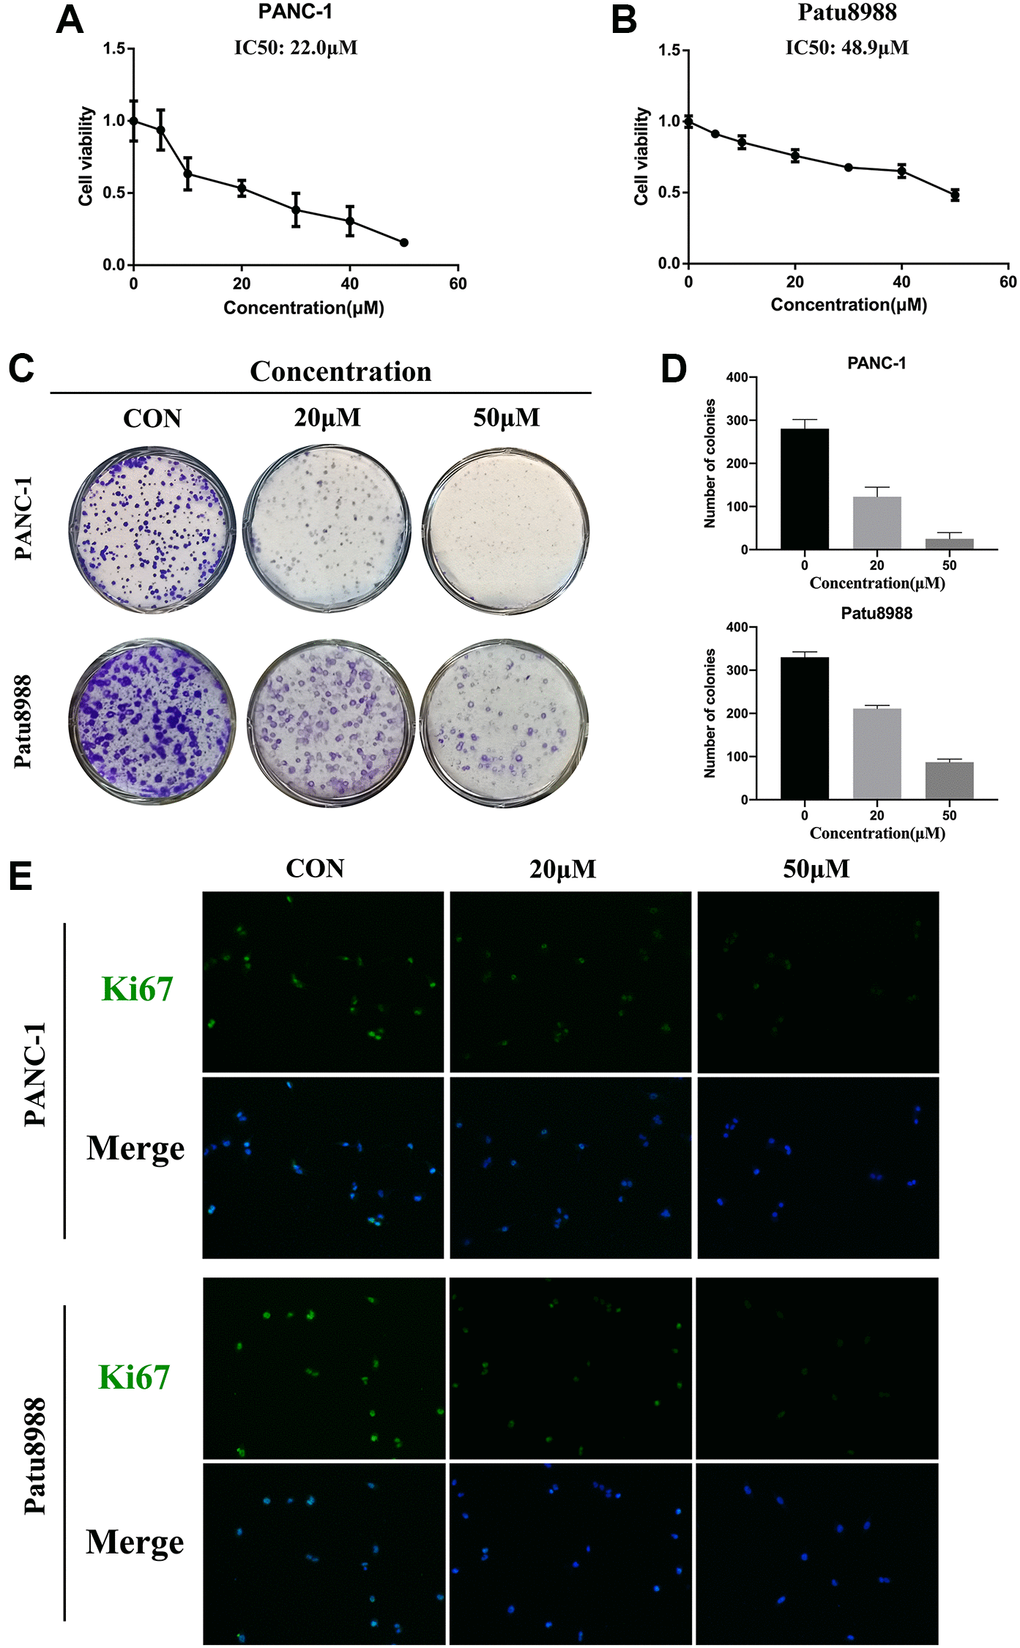 Panaxadiol suppressed the proliferation of human pancreatic cancer cells. (A–B) The cell viability of PANC-1 and Patu8988 was detected by CCK8 assays. The IC50 values of panaxadiol for PANC-1 and Patu8988 cells were 22.0 μM and 48.9 μM correspondingly. PANC-1 and Patu8988 were treated with different concentrations of panaxadiol as soon as they were seeded in 96-well plates, and then they were incubated for 24 h. (C–D) Colony formation assays showed the proliferation of pancreatic cancer cells was suppressed. When the cells were plated in a 6-well plate and incubated for 24 h, 0, 20 μM, and 50 μM of panaxadiol was added to each well. After 14 days, the cells were fixed and stained with crystal purple to count the number of colonies. The results were presented as mean ± SD; *P E) Ki67 immunofluorescence staining showed the Ki67 positive cells decreased after the treatment of panaxadiol.